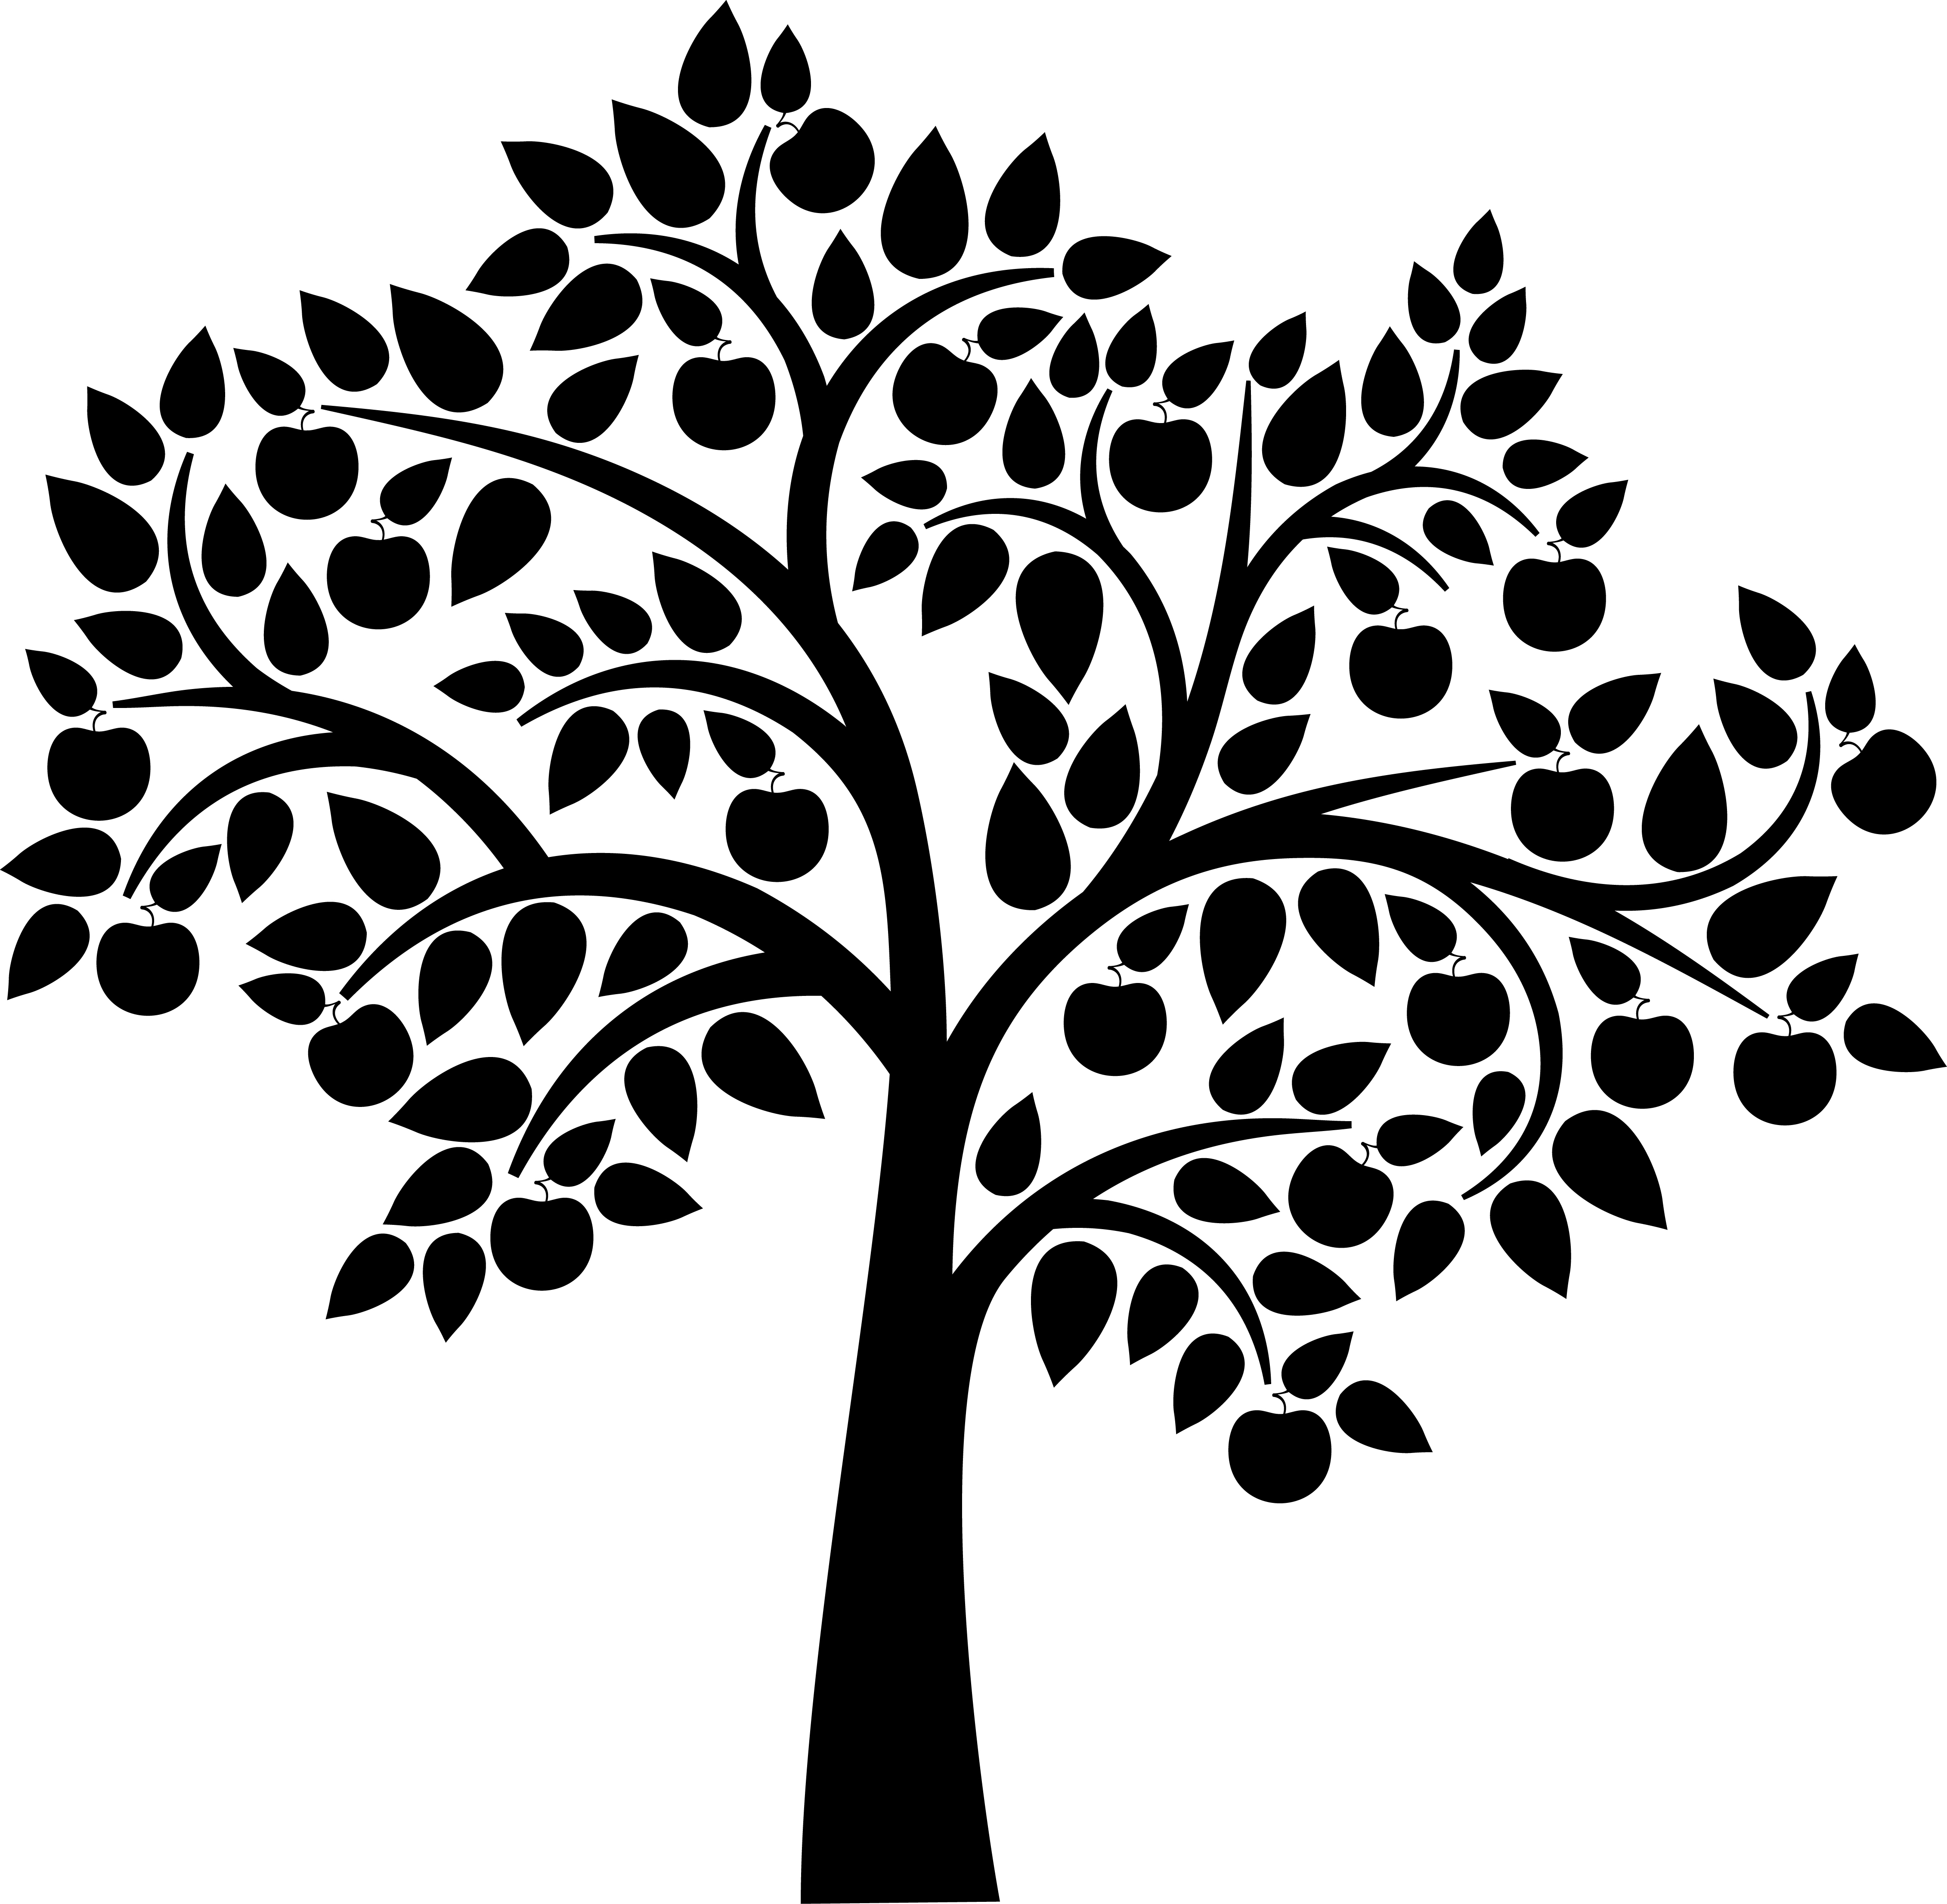 Tree silhouette clipart - Clipground